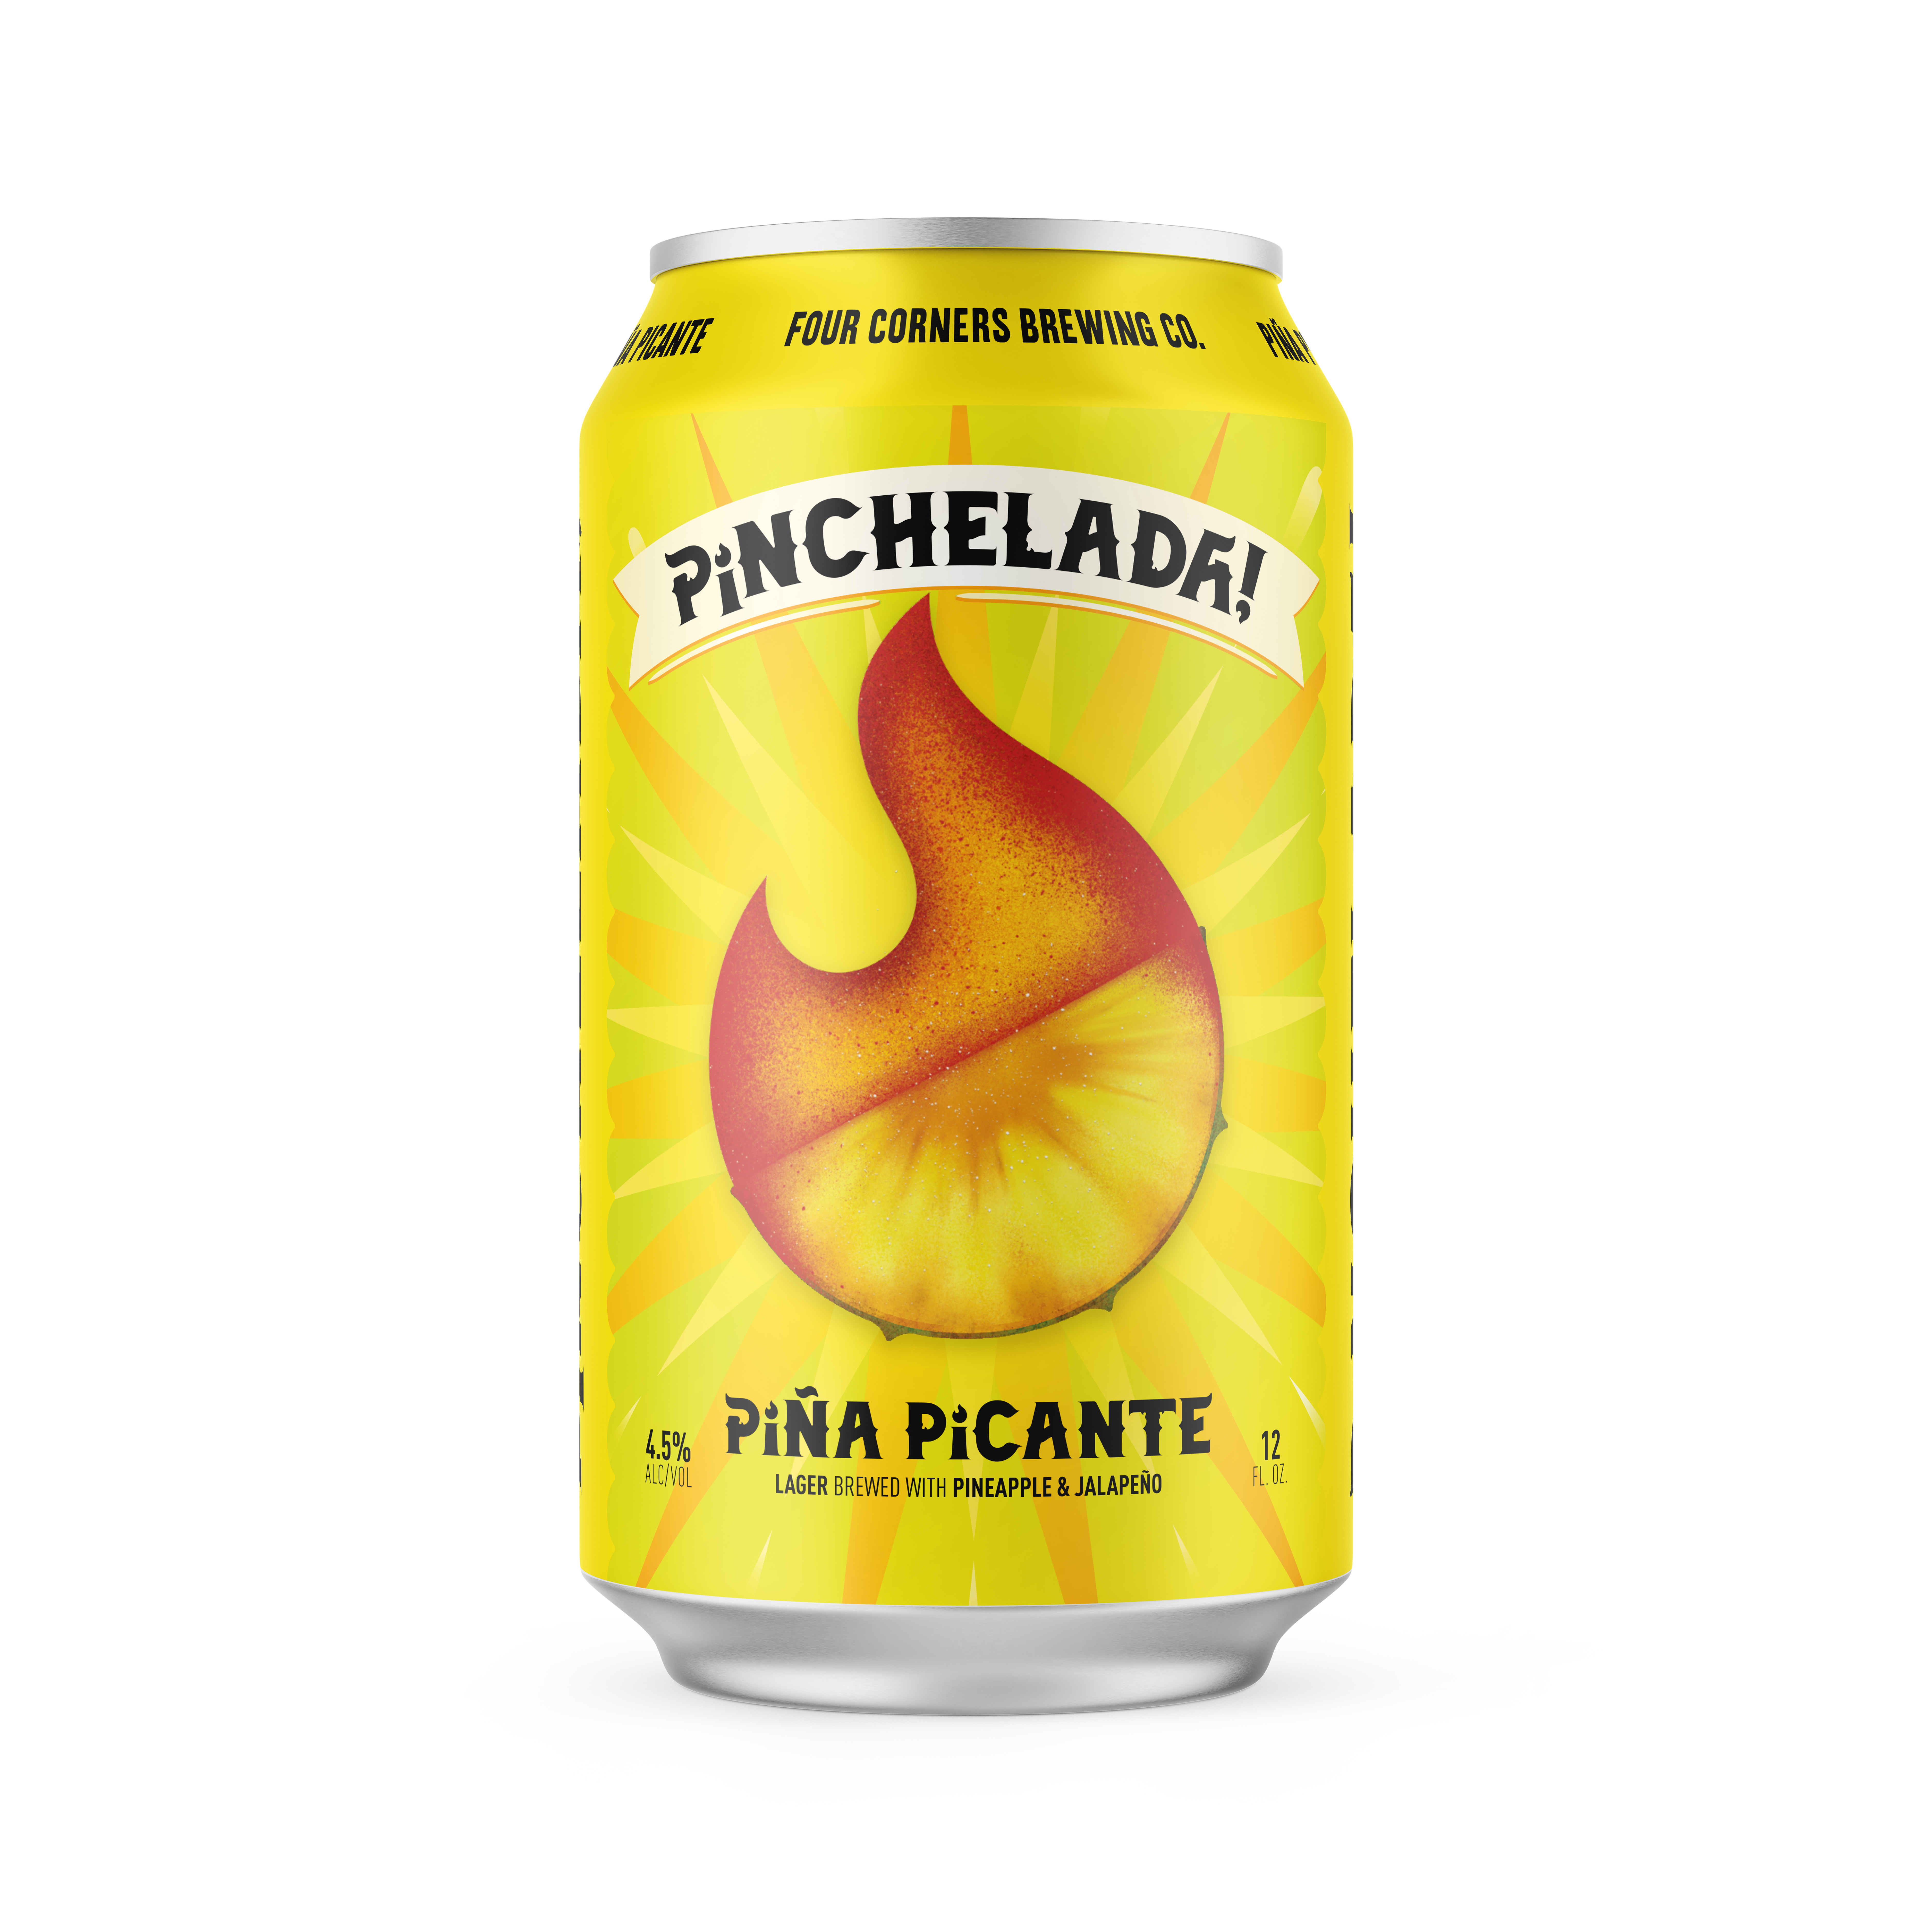 Cheladas are all about refreshment. Pineapple gives this version a burst of flavor without being overly sweet. Chile pepper is subtle and adds a some zest to an already crisp lager base. Enjoy it cold or over ice. A rimmer of chamoy y Tajín is always a welcome touch.